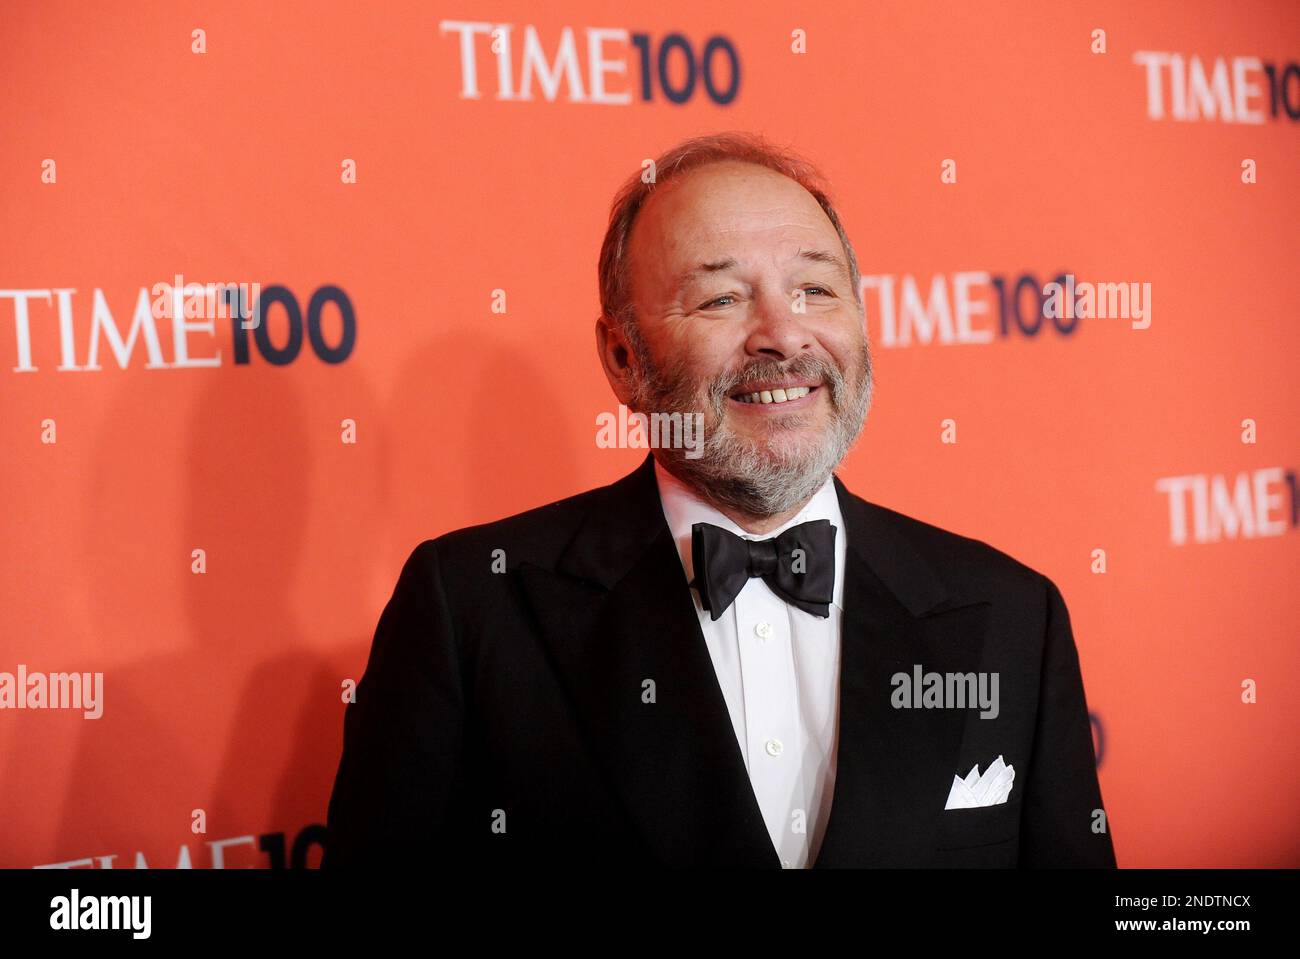 Journalist Joe Klein attends the TIME 100 gala celebrating the 100 most influential people, at the Time Warner Center, Tuesday, May 4, 2010 in New York. (AP Photo/Evan Agostini) Stock Photo